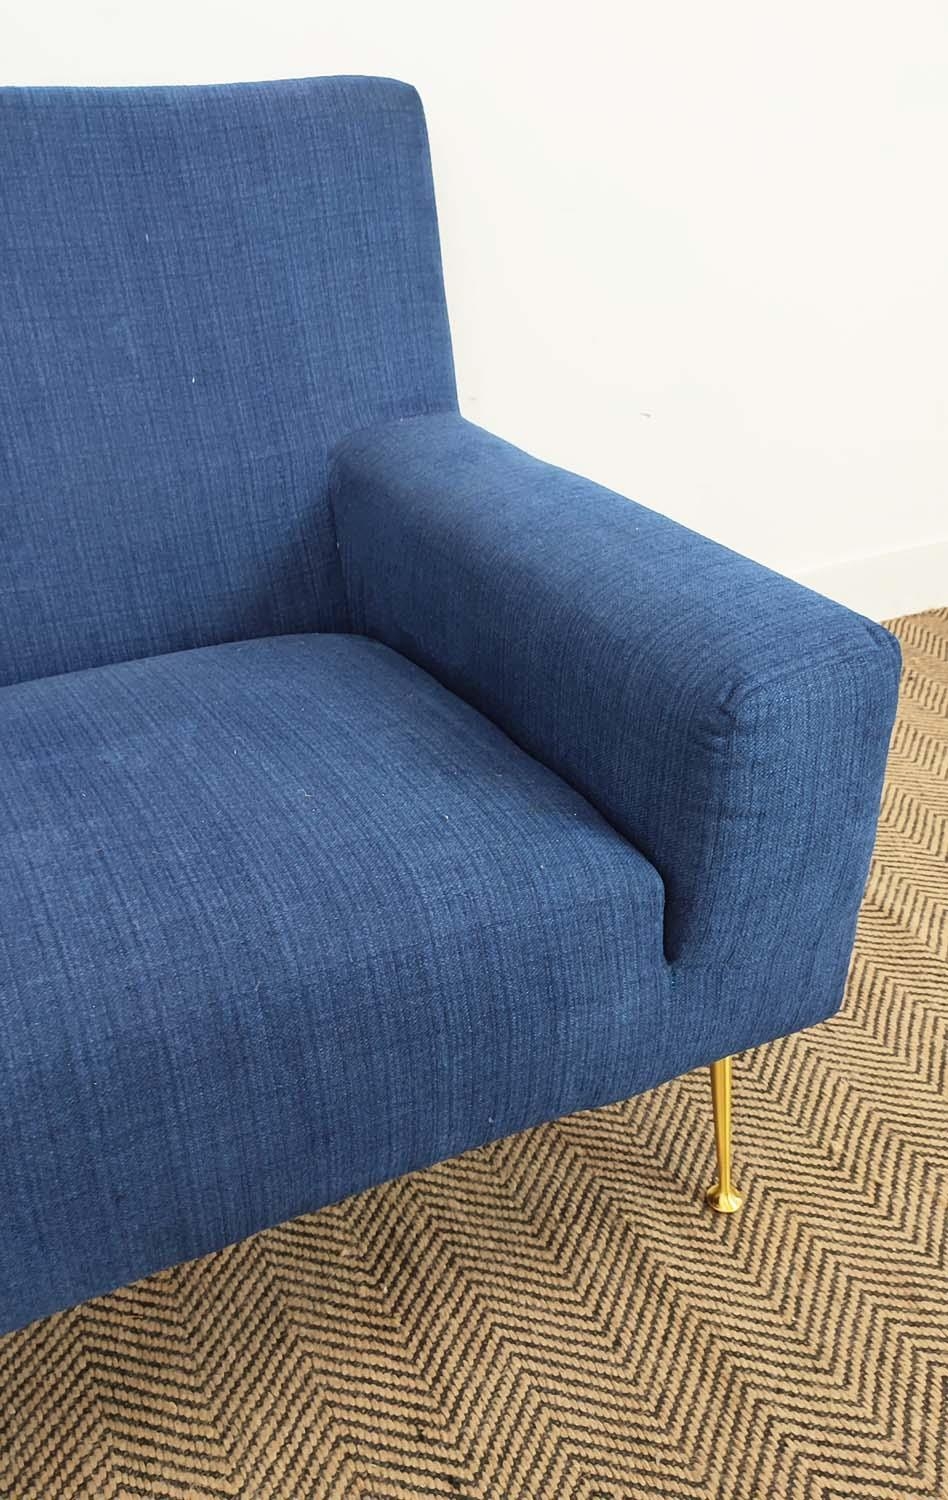 ARMCHAIR, blue chenille with brass legs, 85cm H x 97cm x 80cm. - Image 6 of 10